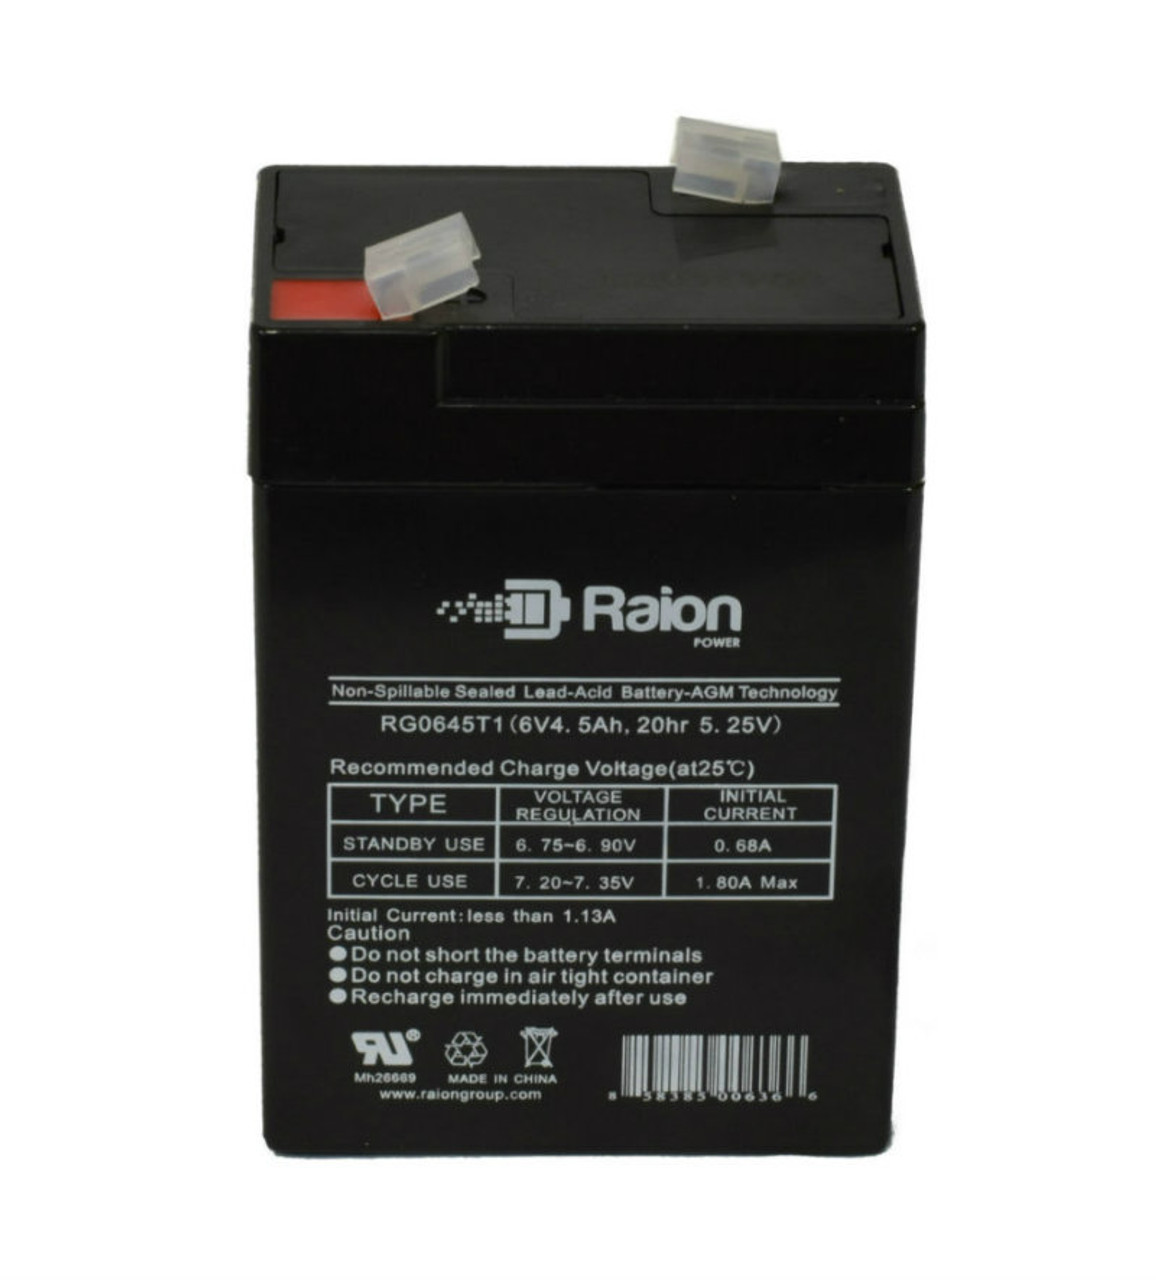 Raion Power RG0645T1 Replacement Battery Cartridge for Alaris Medical 2001 Intell Pump